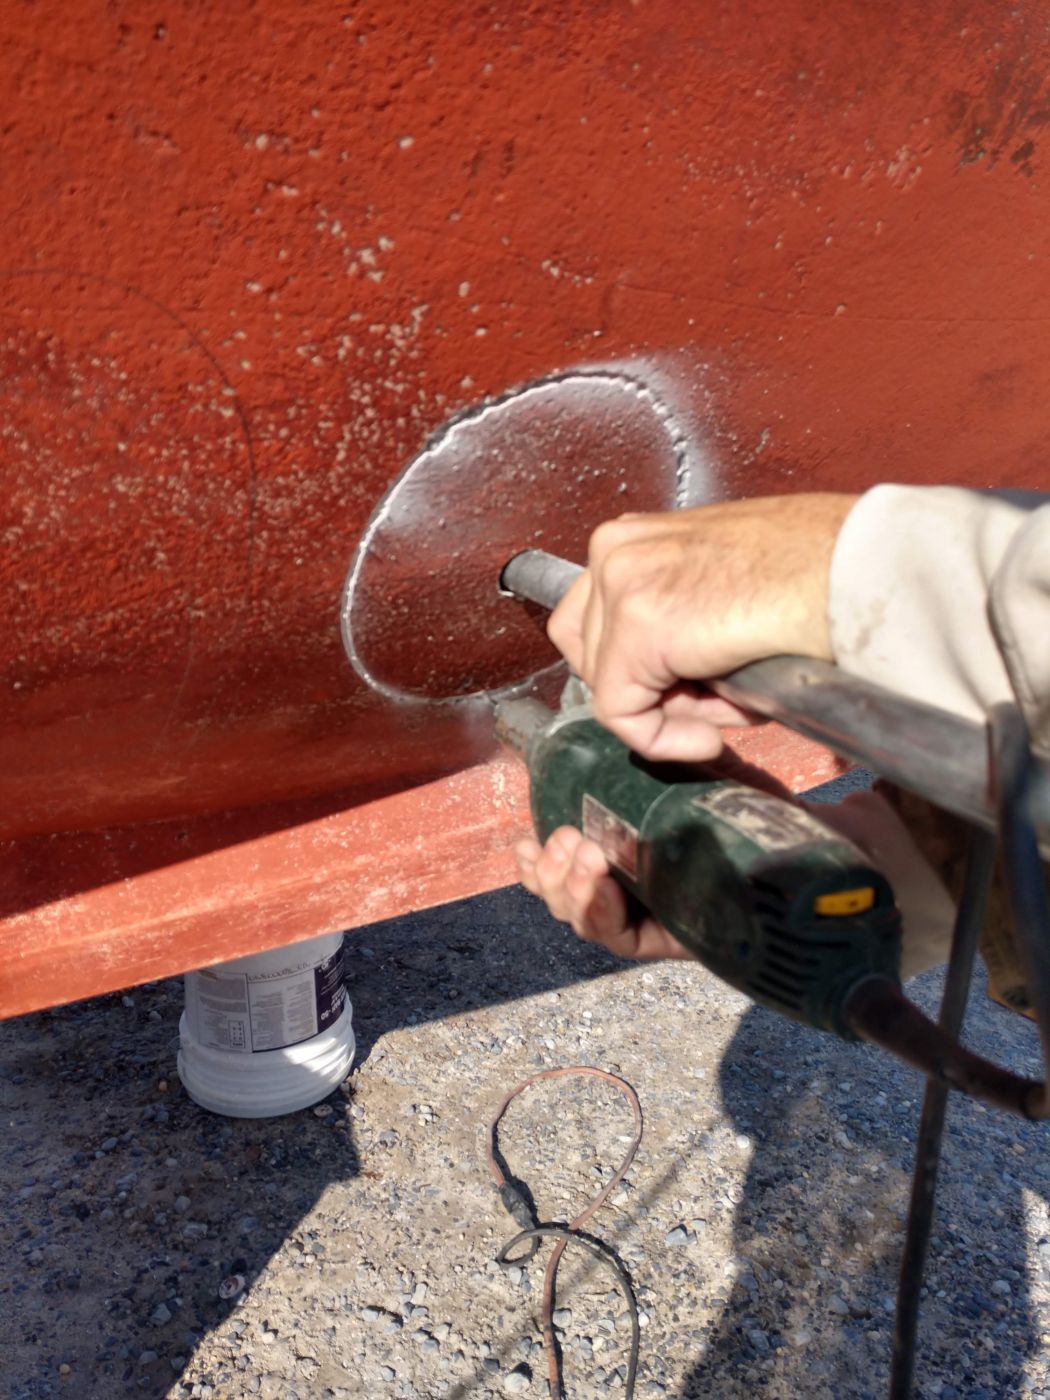 Bow Thruster Installation - Young Brothers commercial fishing boat